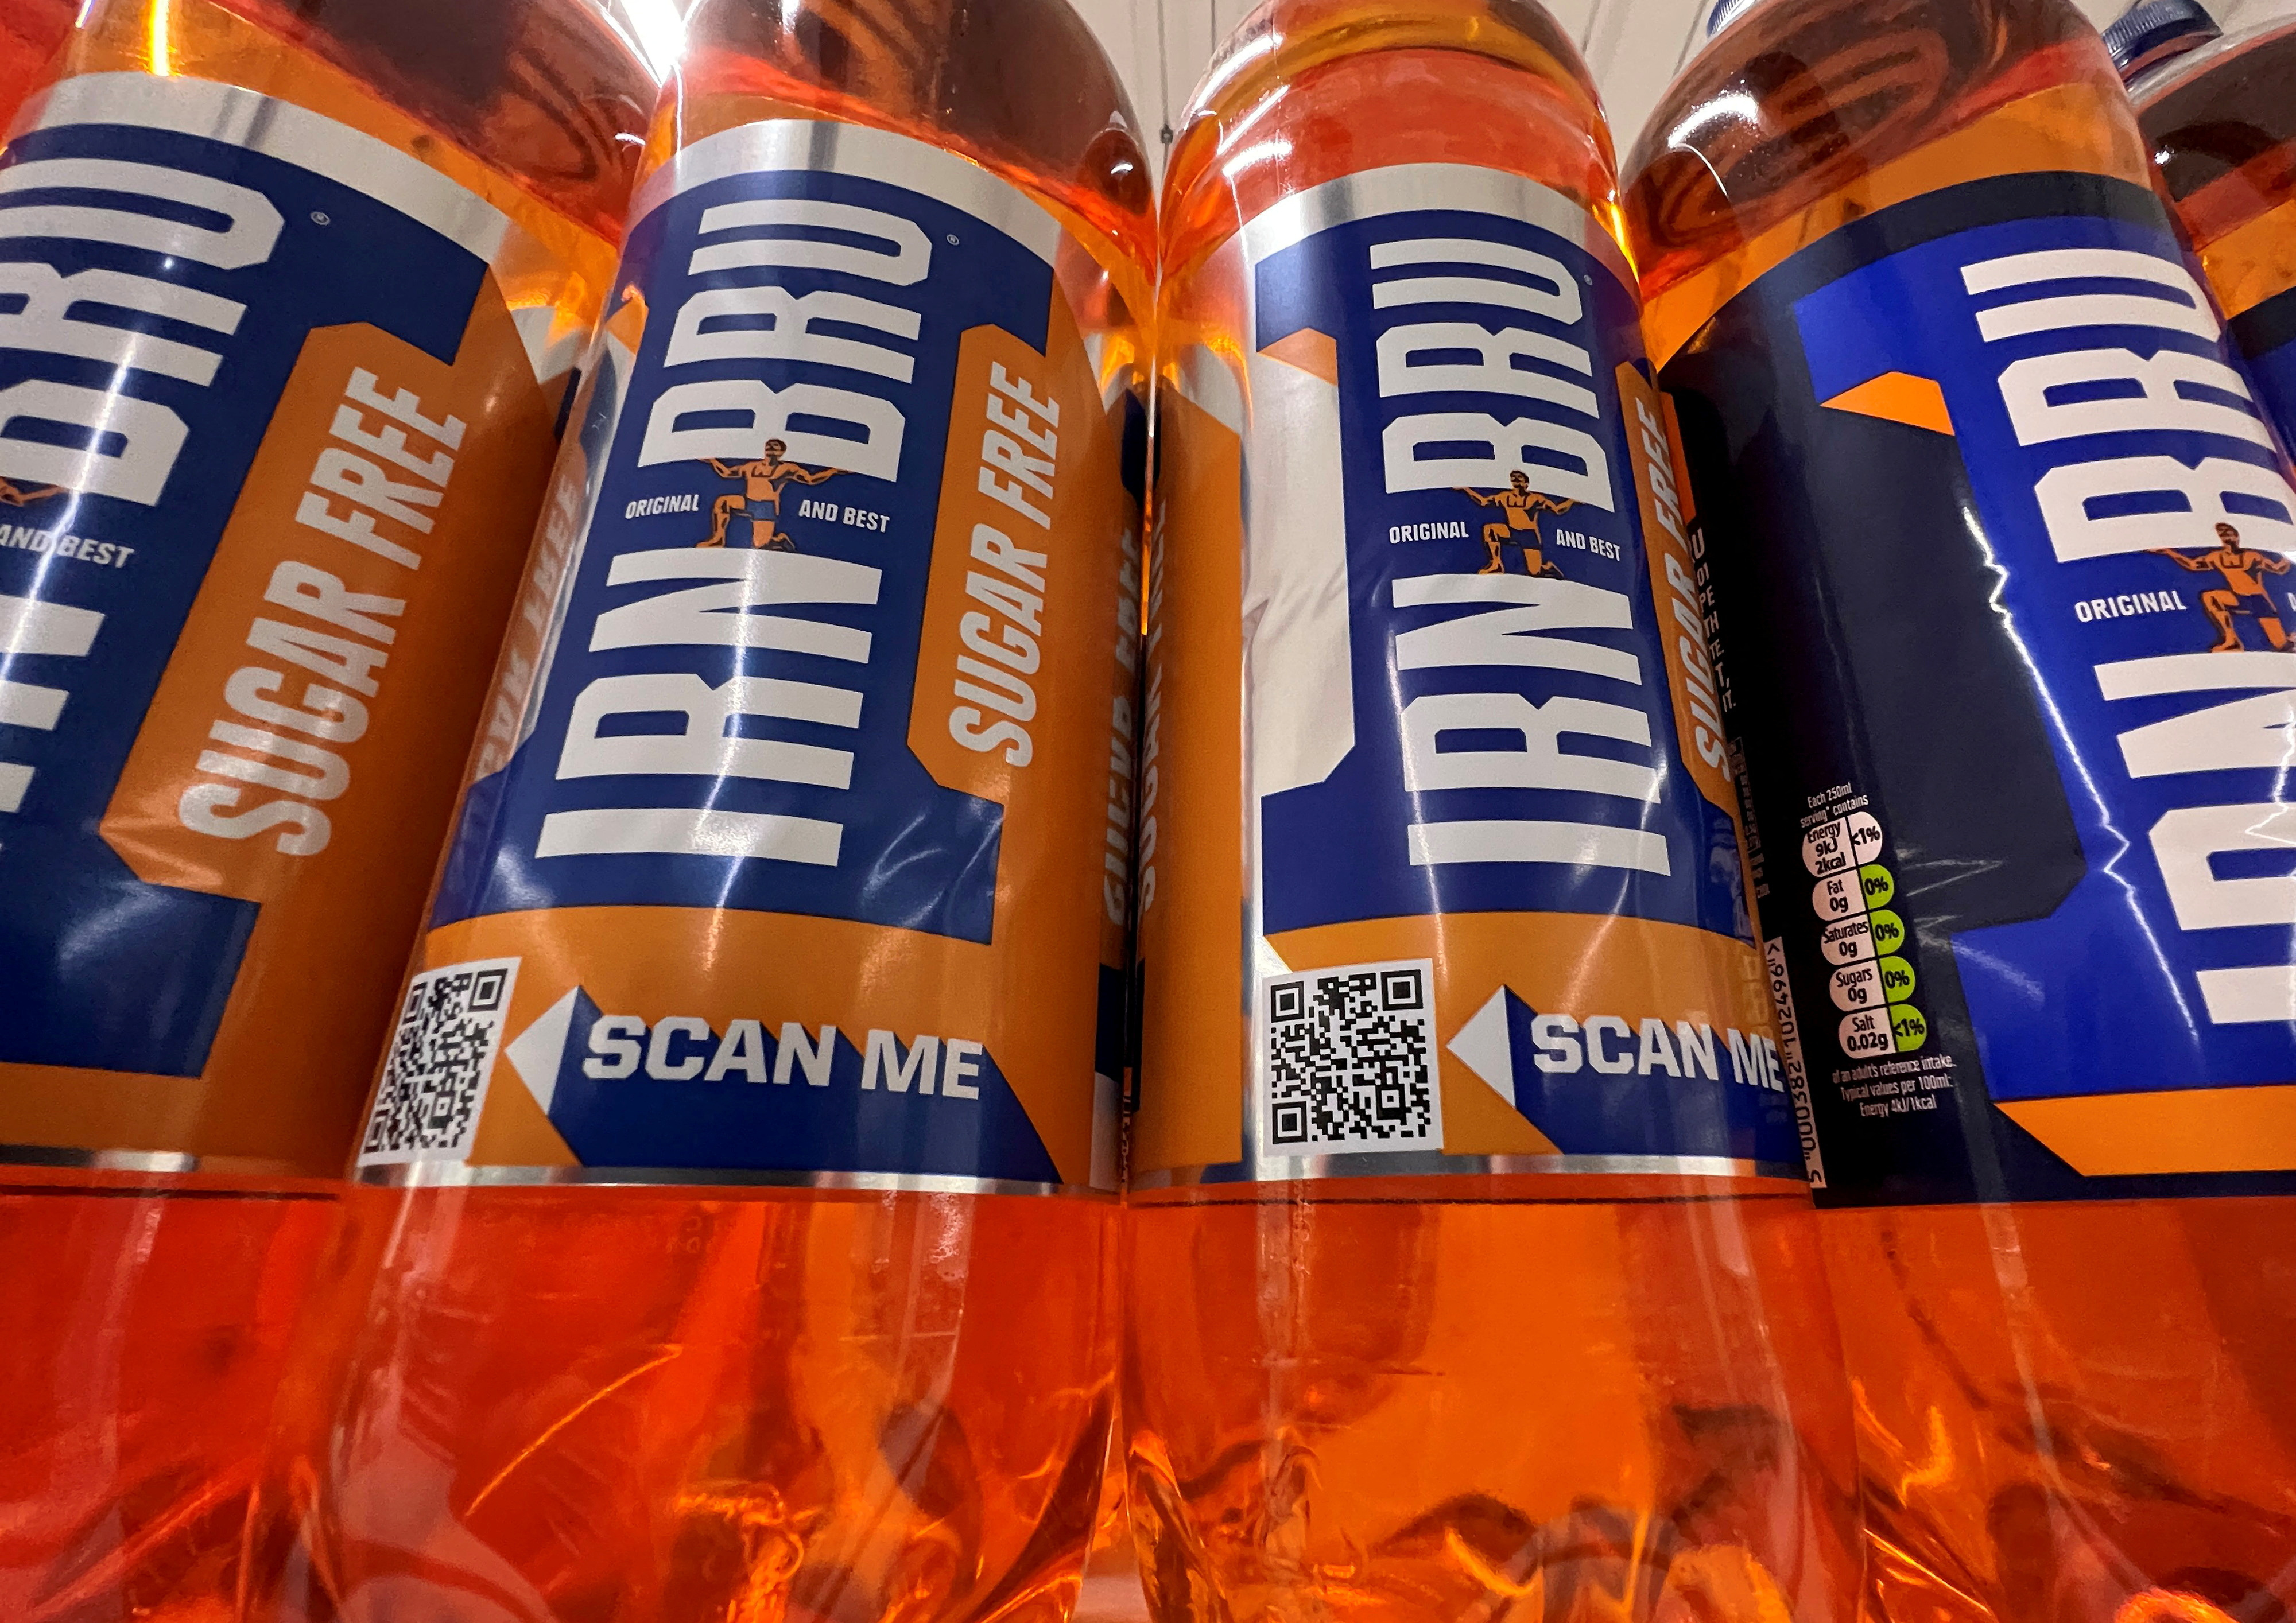 Bottles of Irn-Bru drink, produced by drinks manufacturer A.G. Barr, are displayed in a supermarket in London